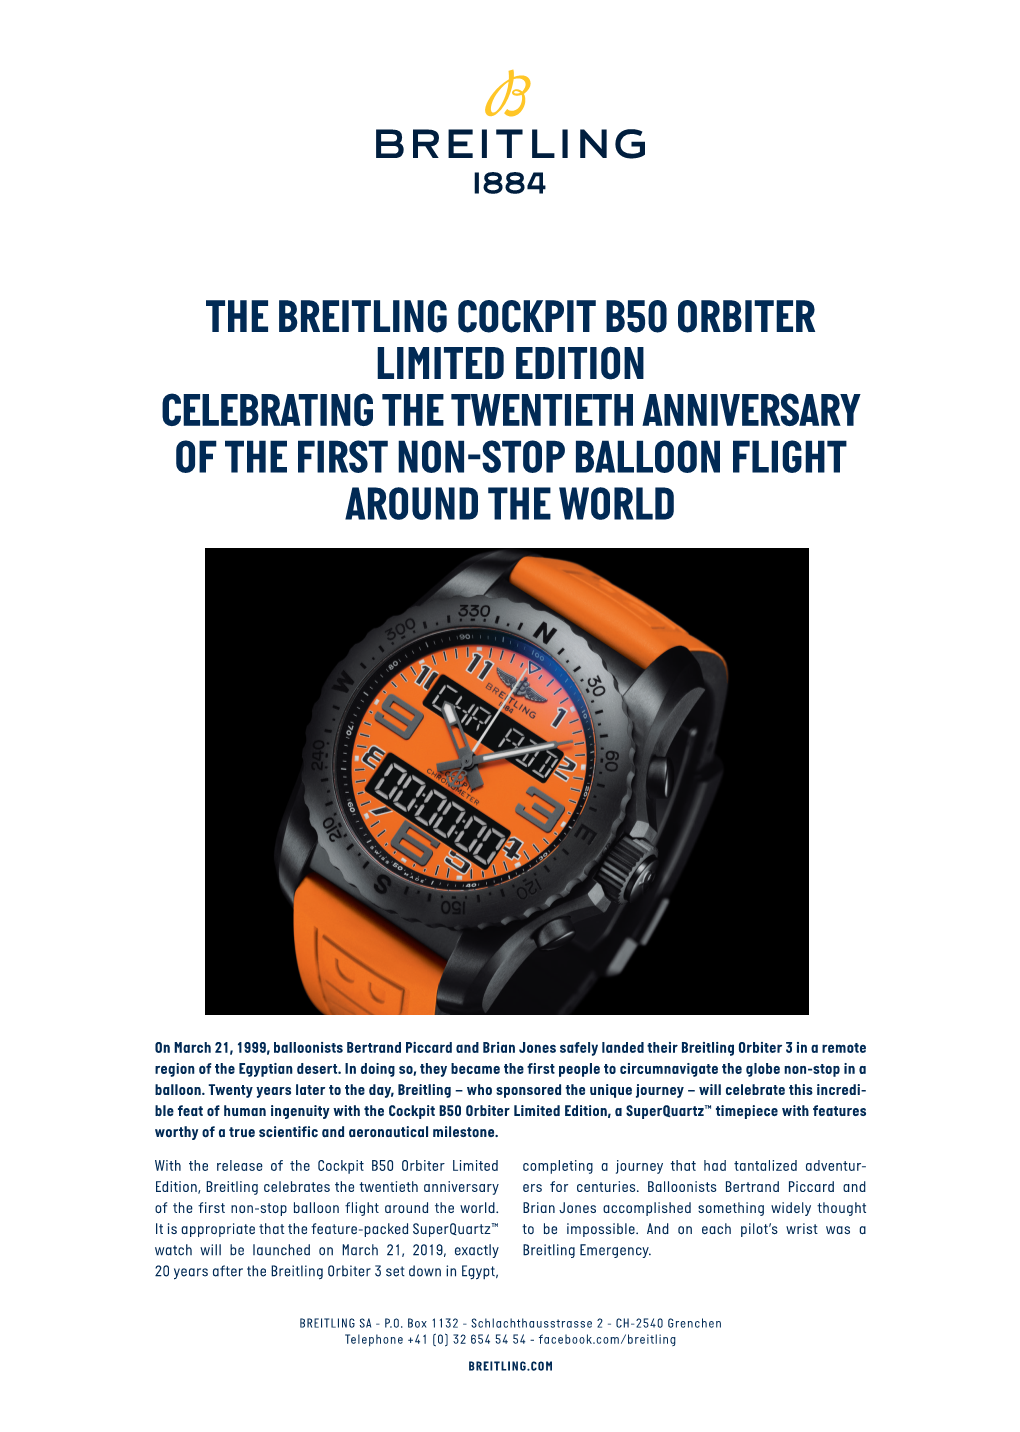 The Breitling Cockpit B50 Orbiter Limited Edition Celebrating the Twentieth Anniversary of the First Non-Stop Balloon Flight Around the World